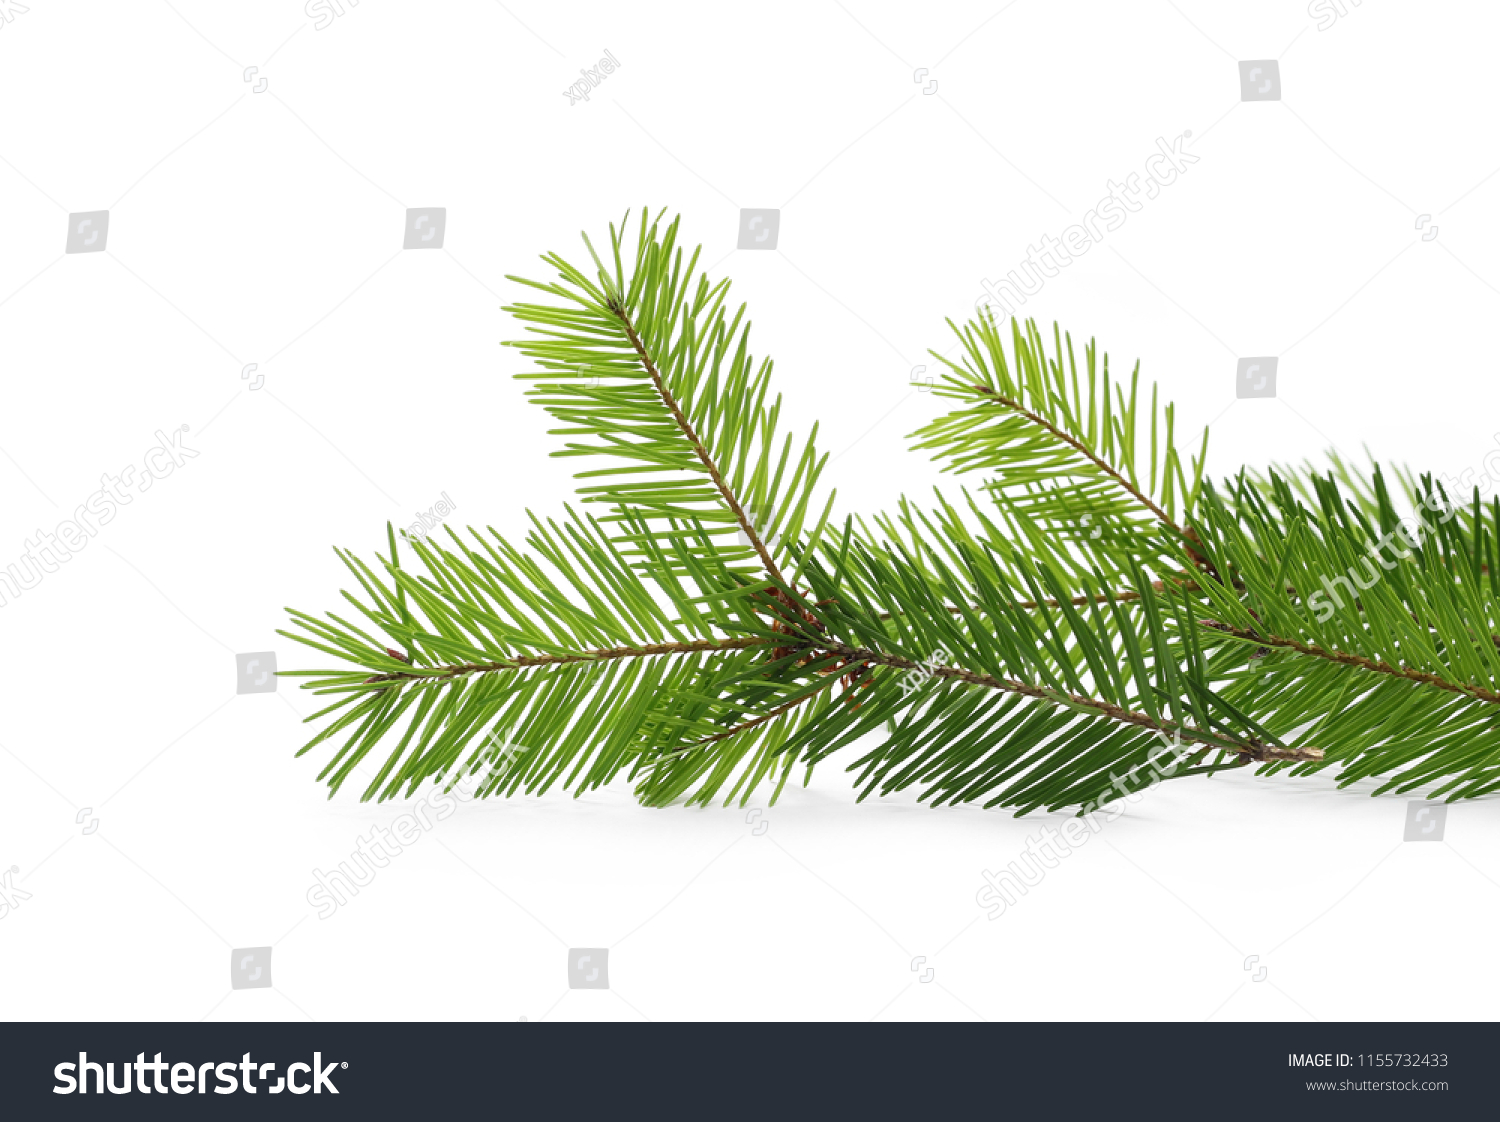 Pine branch, natural decoration isolated on white background #1155732433